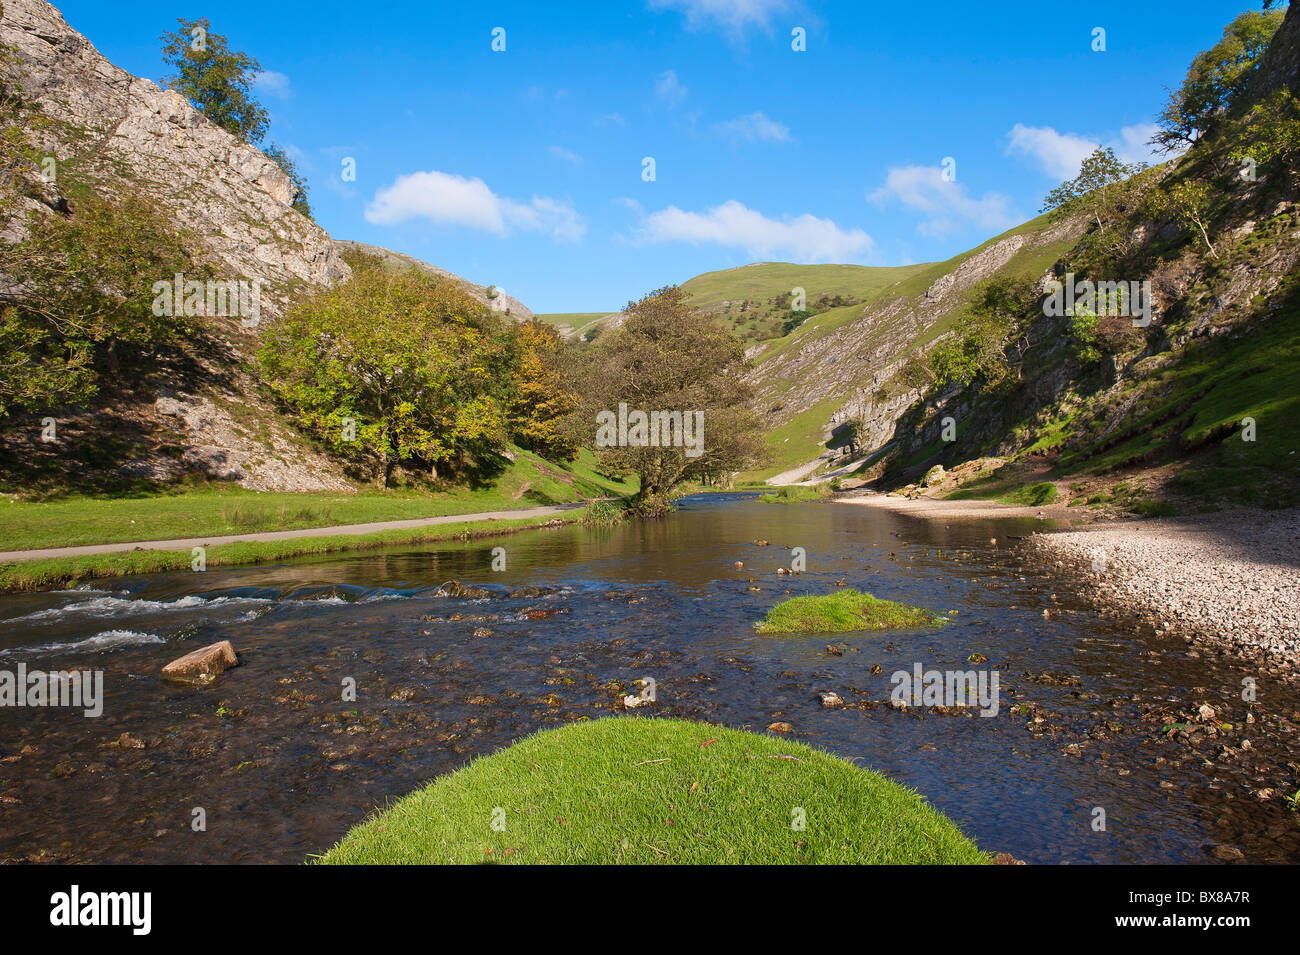 Dovedale in the Peak District, Derbyshire, England is a wonderful area for walking. Trout fish can be found in the river. Stock Photo